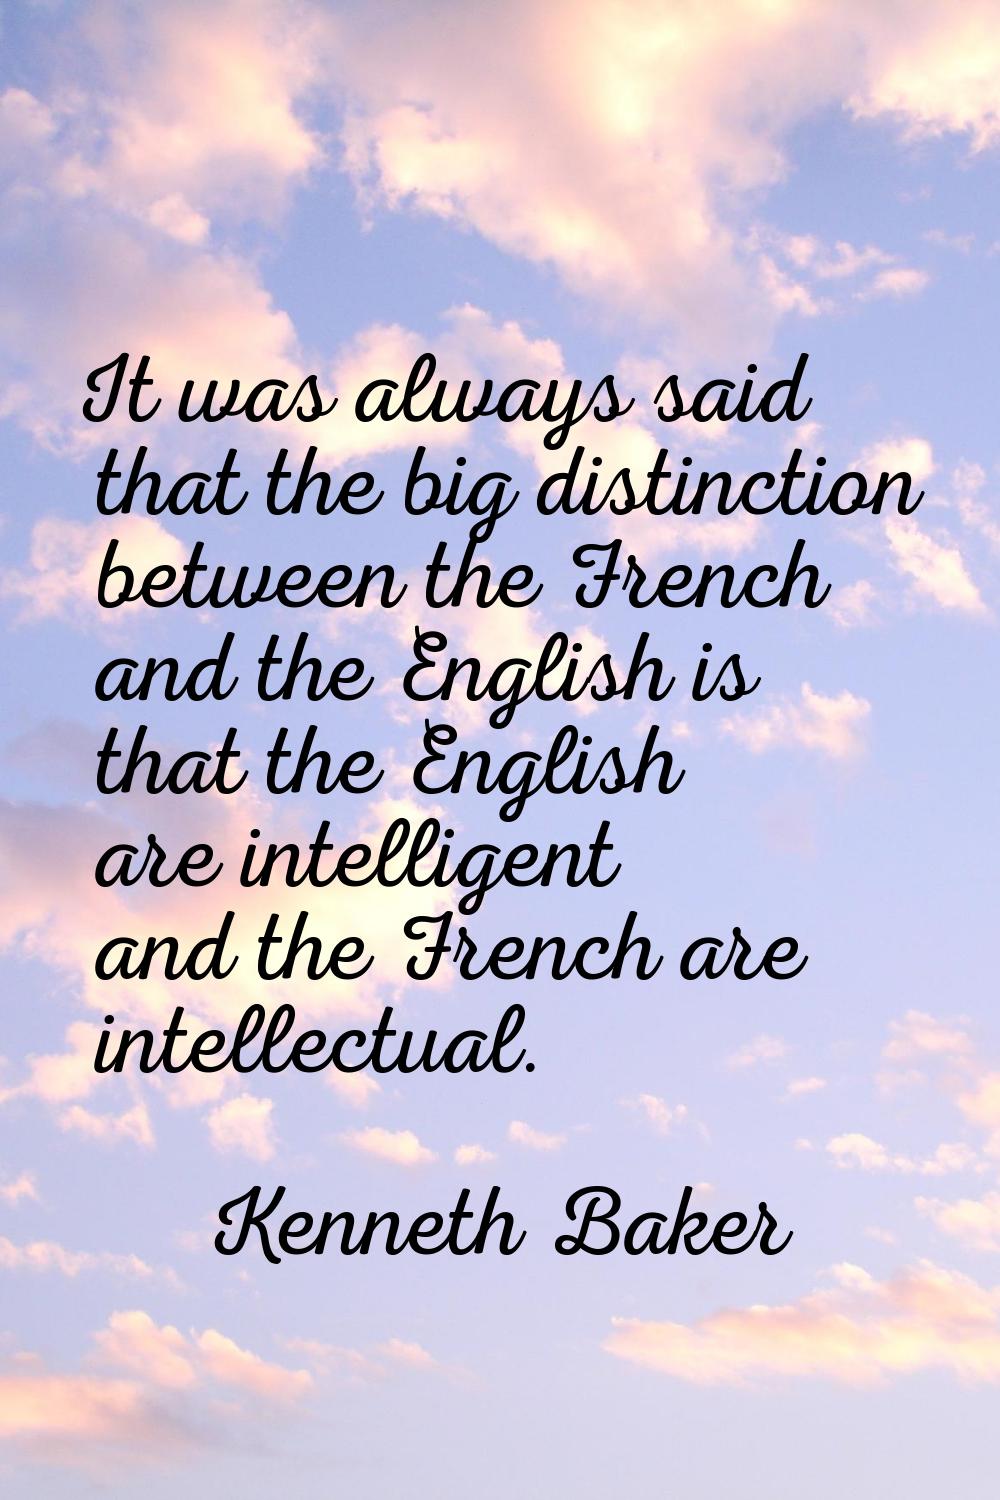 It was always said that the big distinction between the French and the English is that the English 